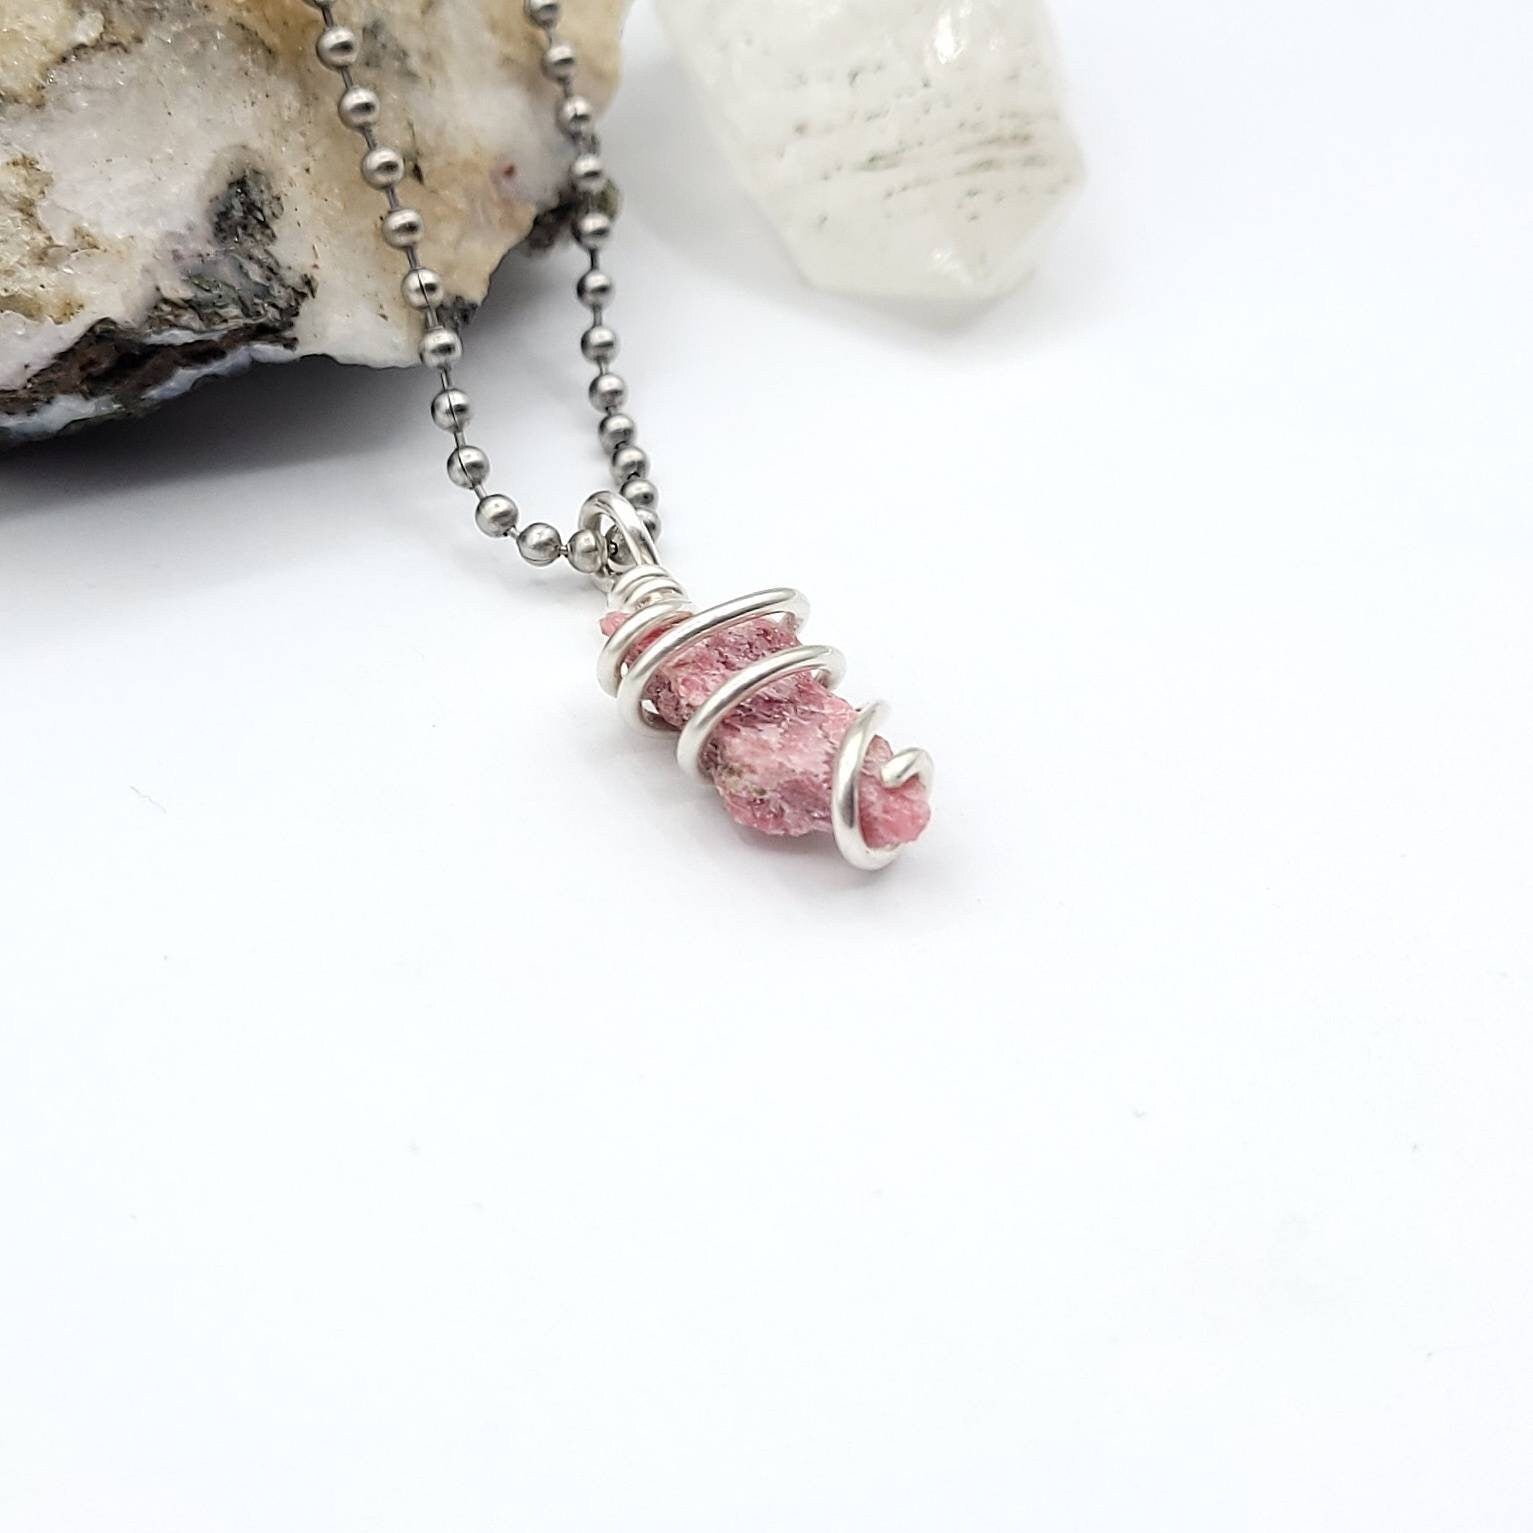 Raw Rhodonite Necklace, Silver Wire Wrapped Rhodonite Pendant